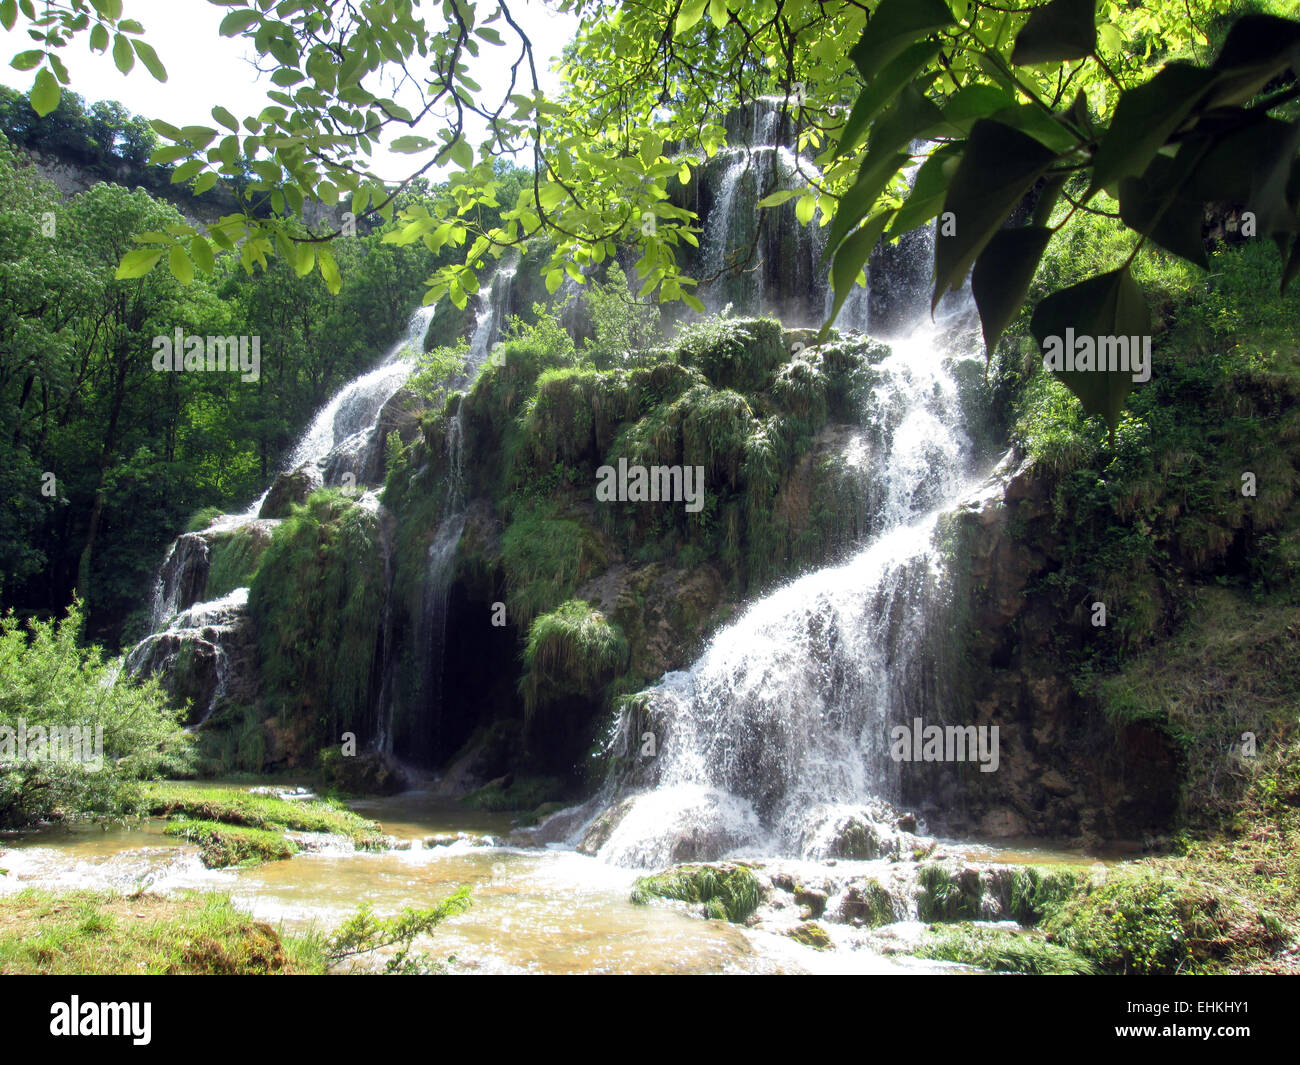 Waterfall and basins of Baume les messieurs in France Stock Photo